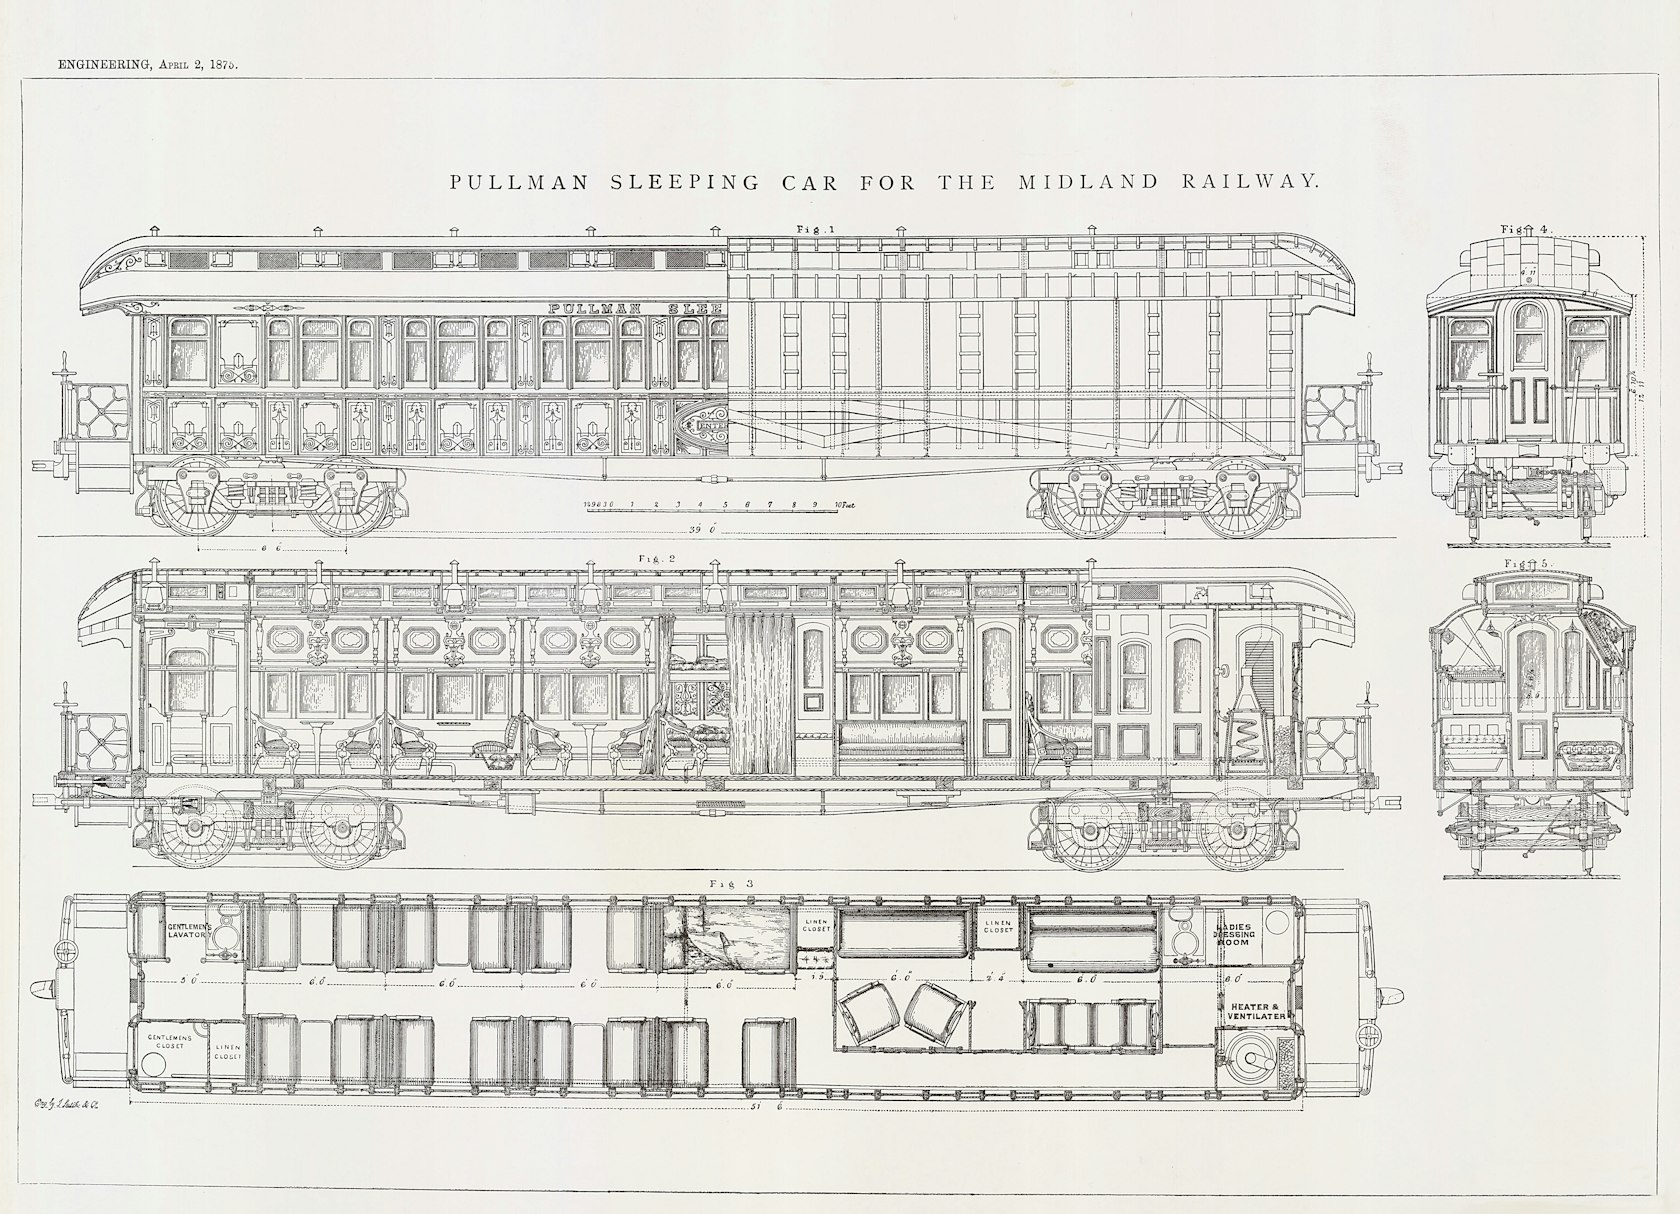 RFB01175 extraxct from The Engineer – Pullman sleeping car drawing